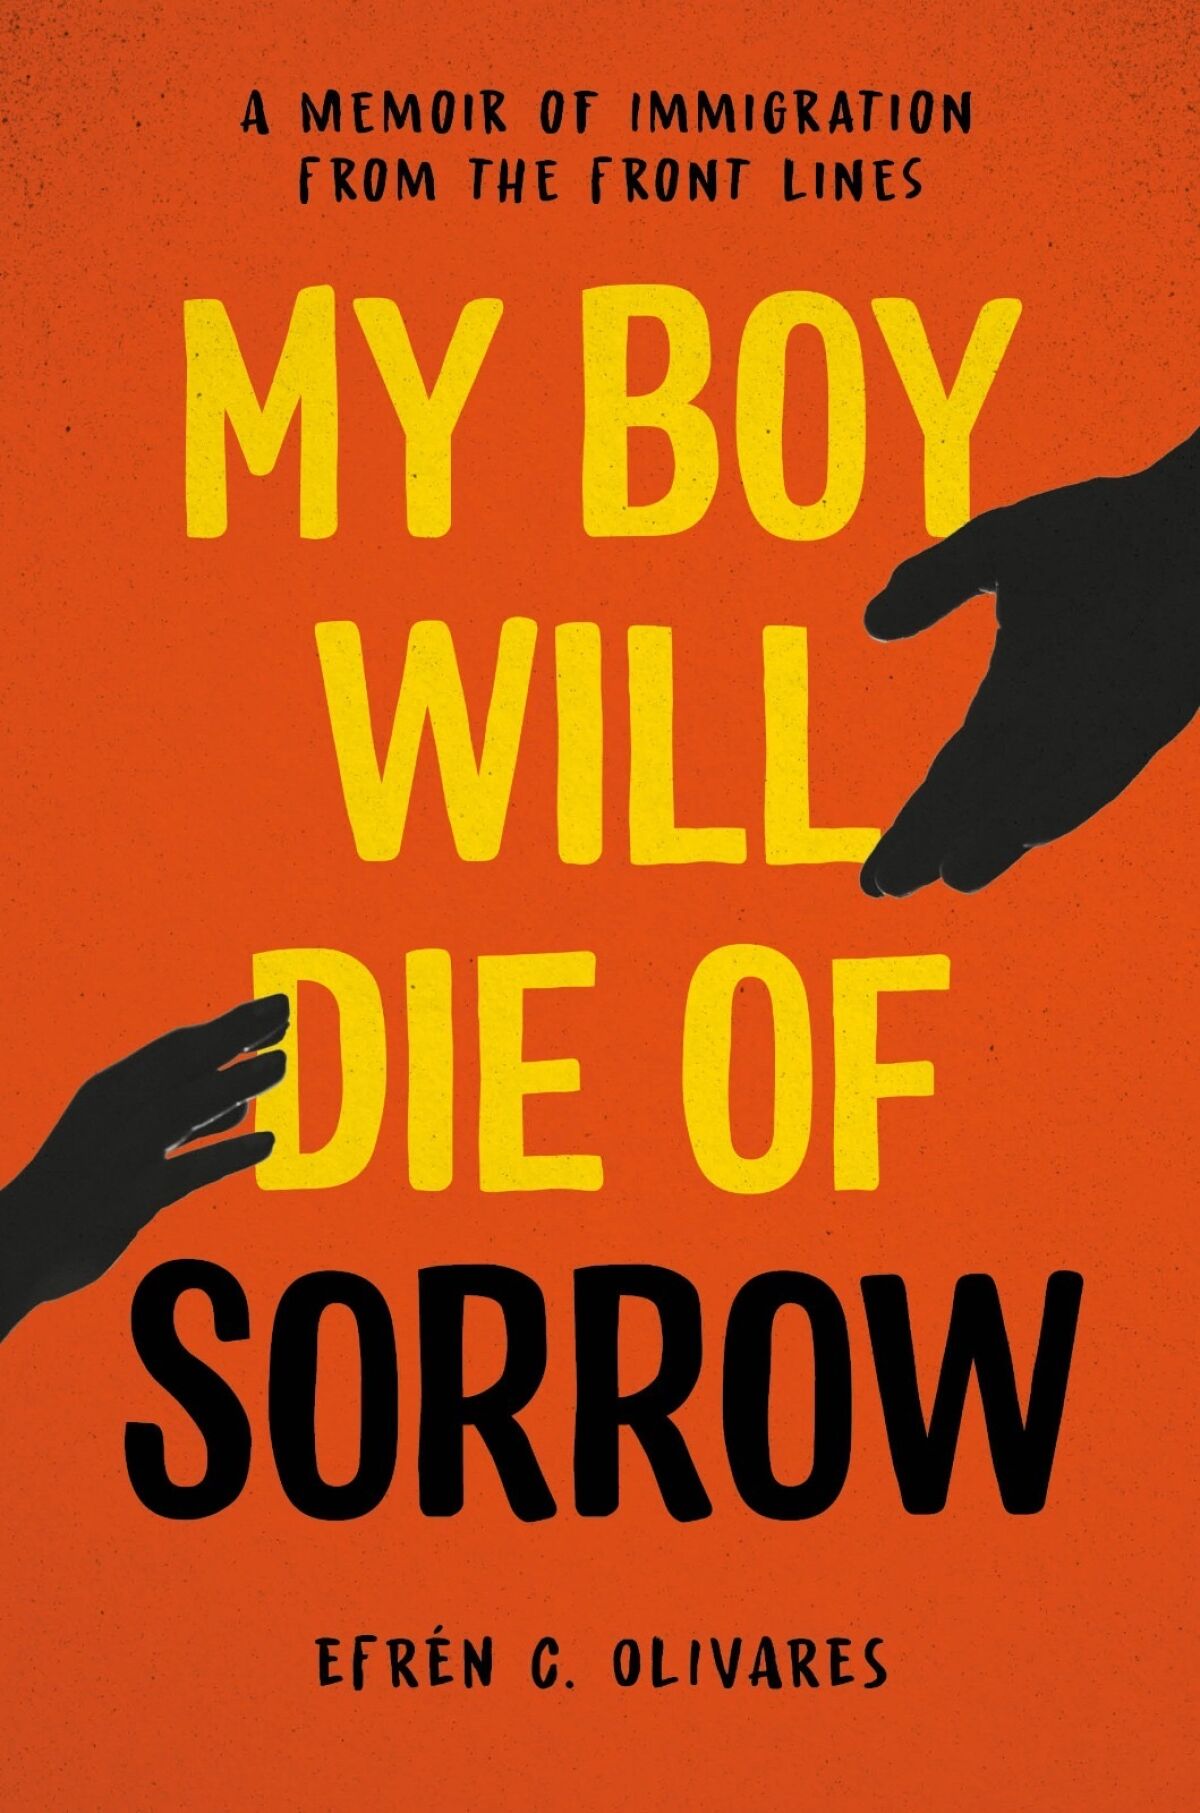 Book cover for "My boy will die of sorrow"